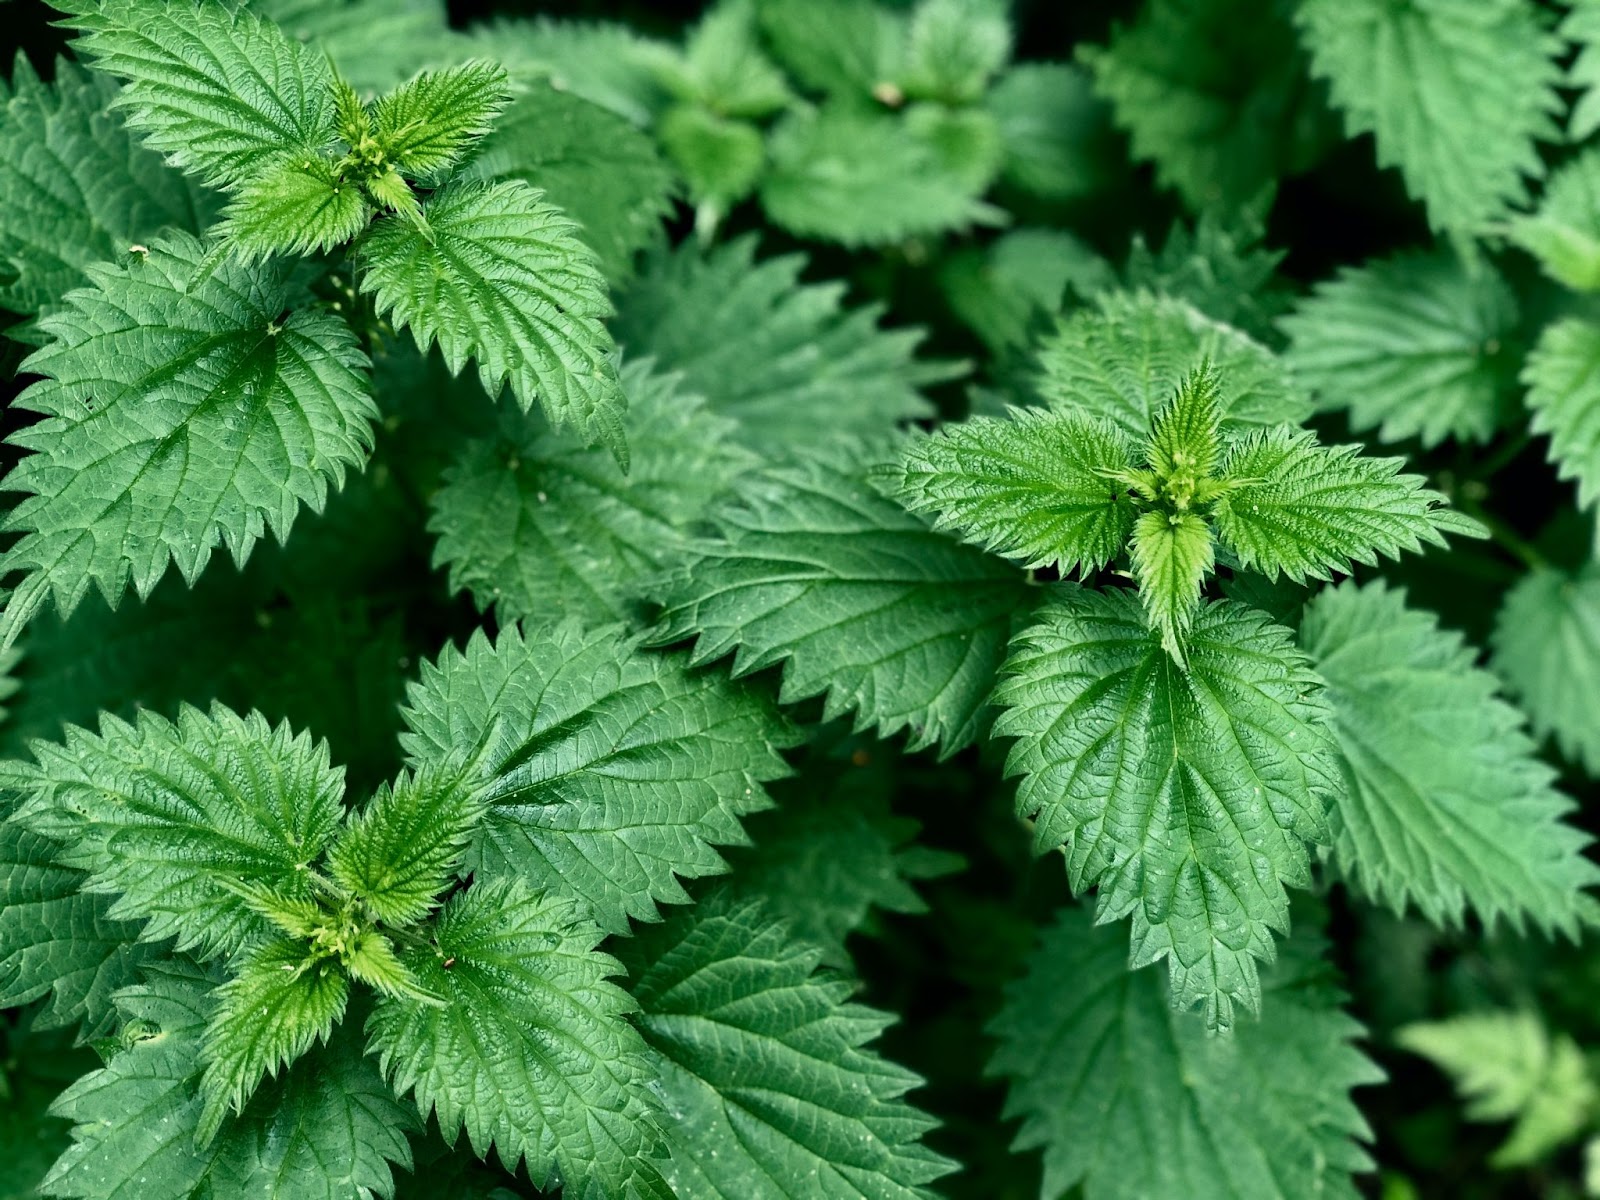 Pointy deep green leaves of stinging nettle for lungs growing wild.